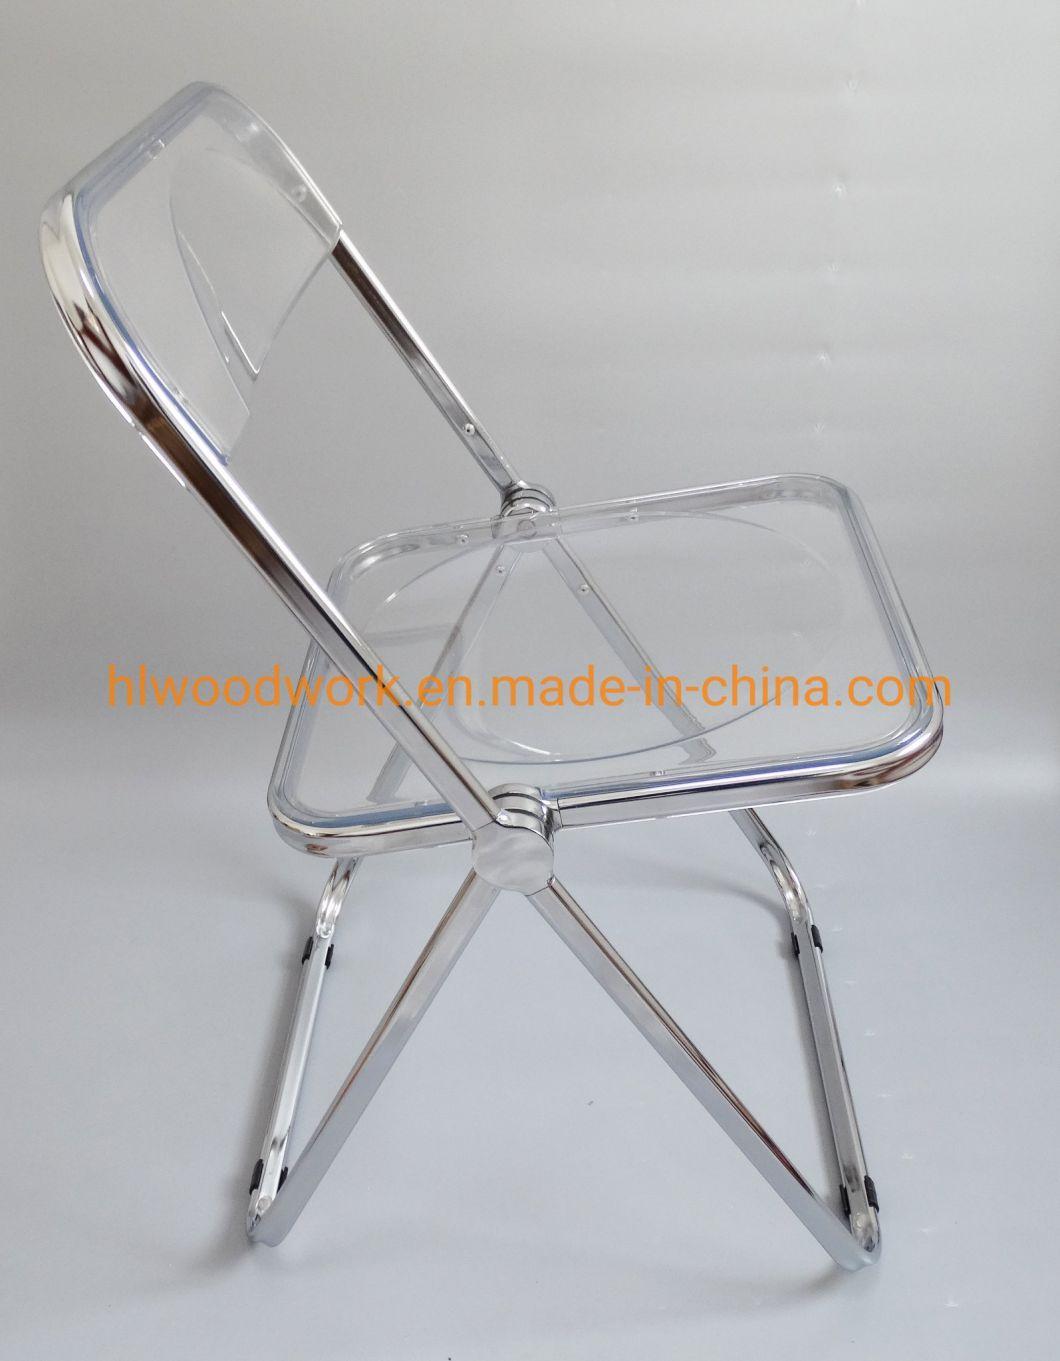 Modern Transparent Orange Folding Chair PC Plastic Outdoor Chair Chrome Frame Office Bar Dining Leisure Banquet Wedding Meeting Chair Plastic Dining Chair